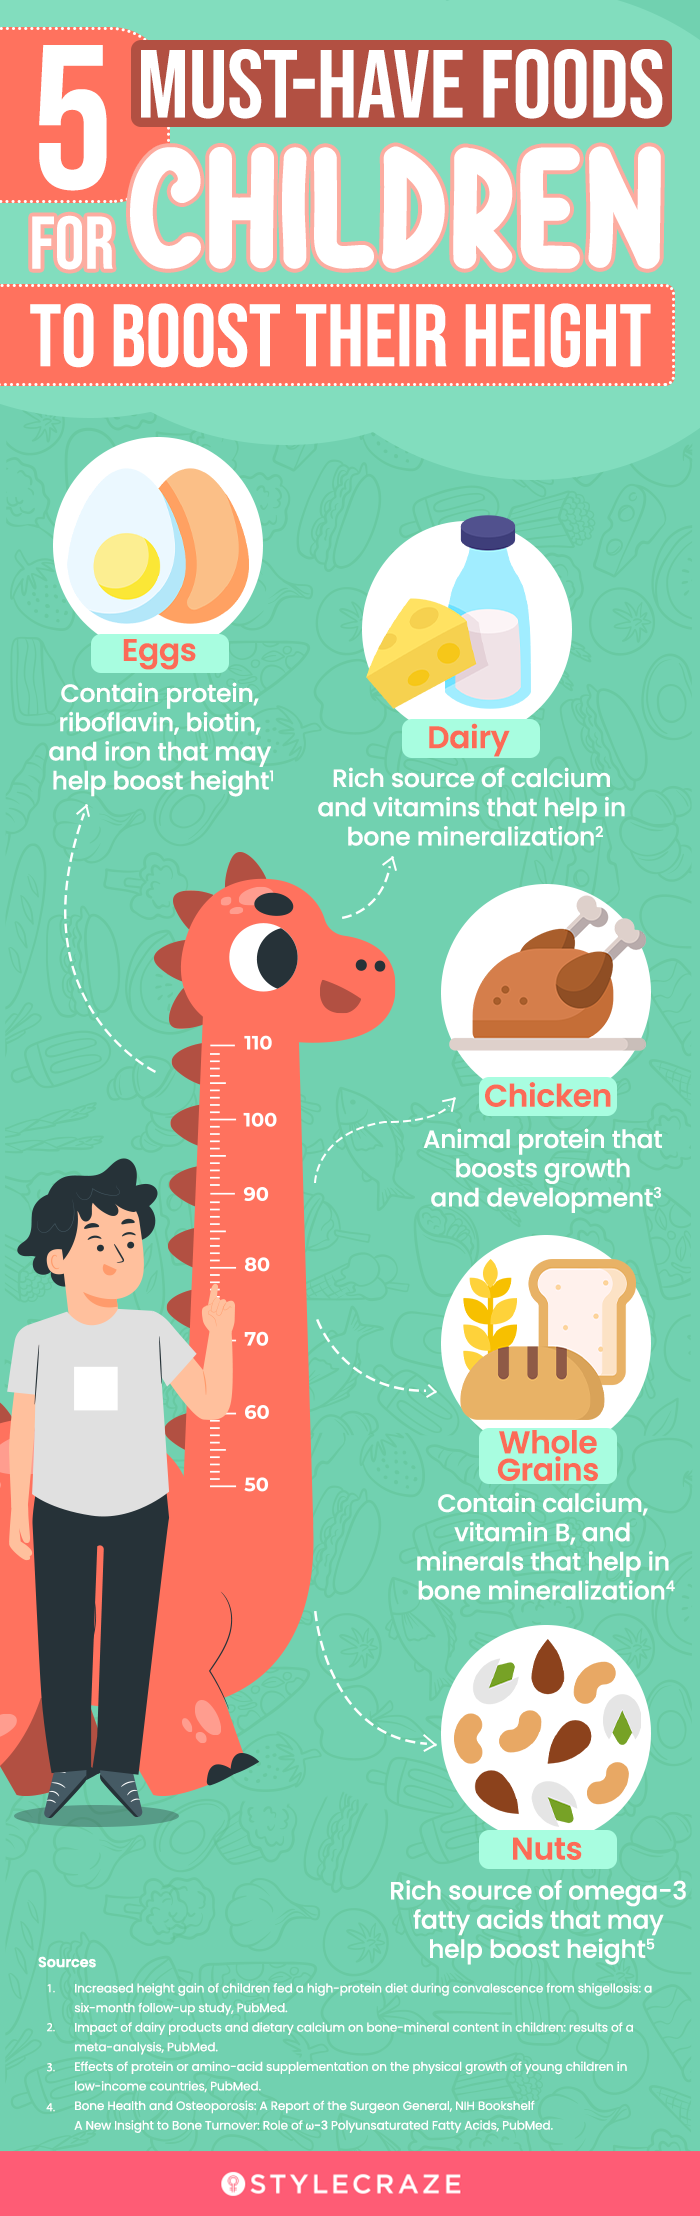 5 must have foods for children to boost their height (infographic)